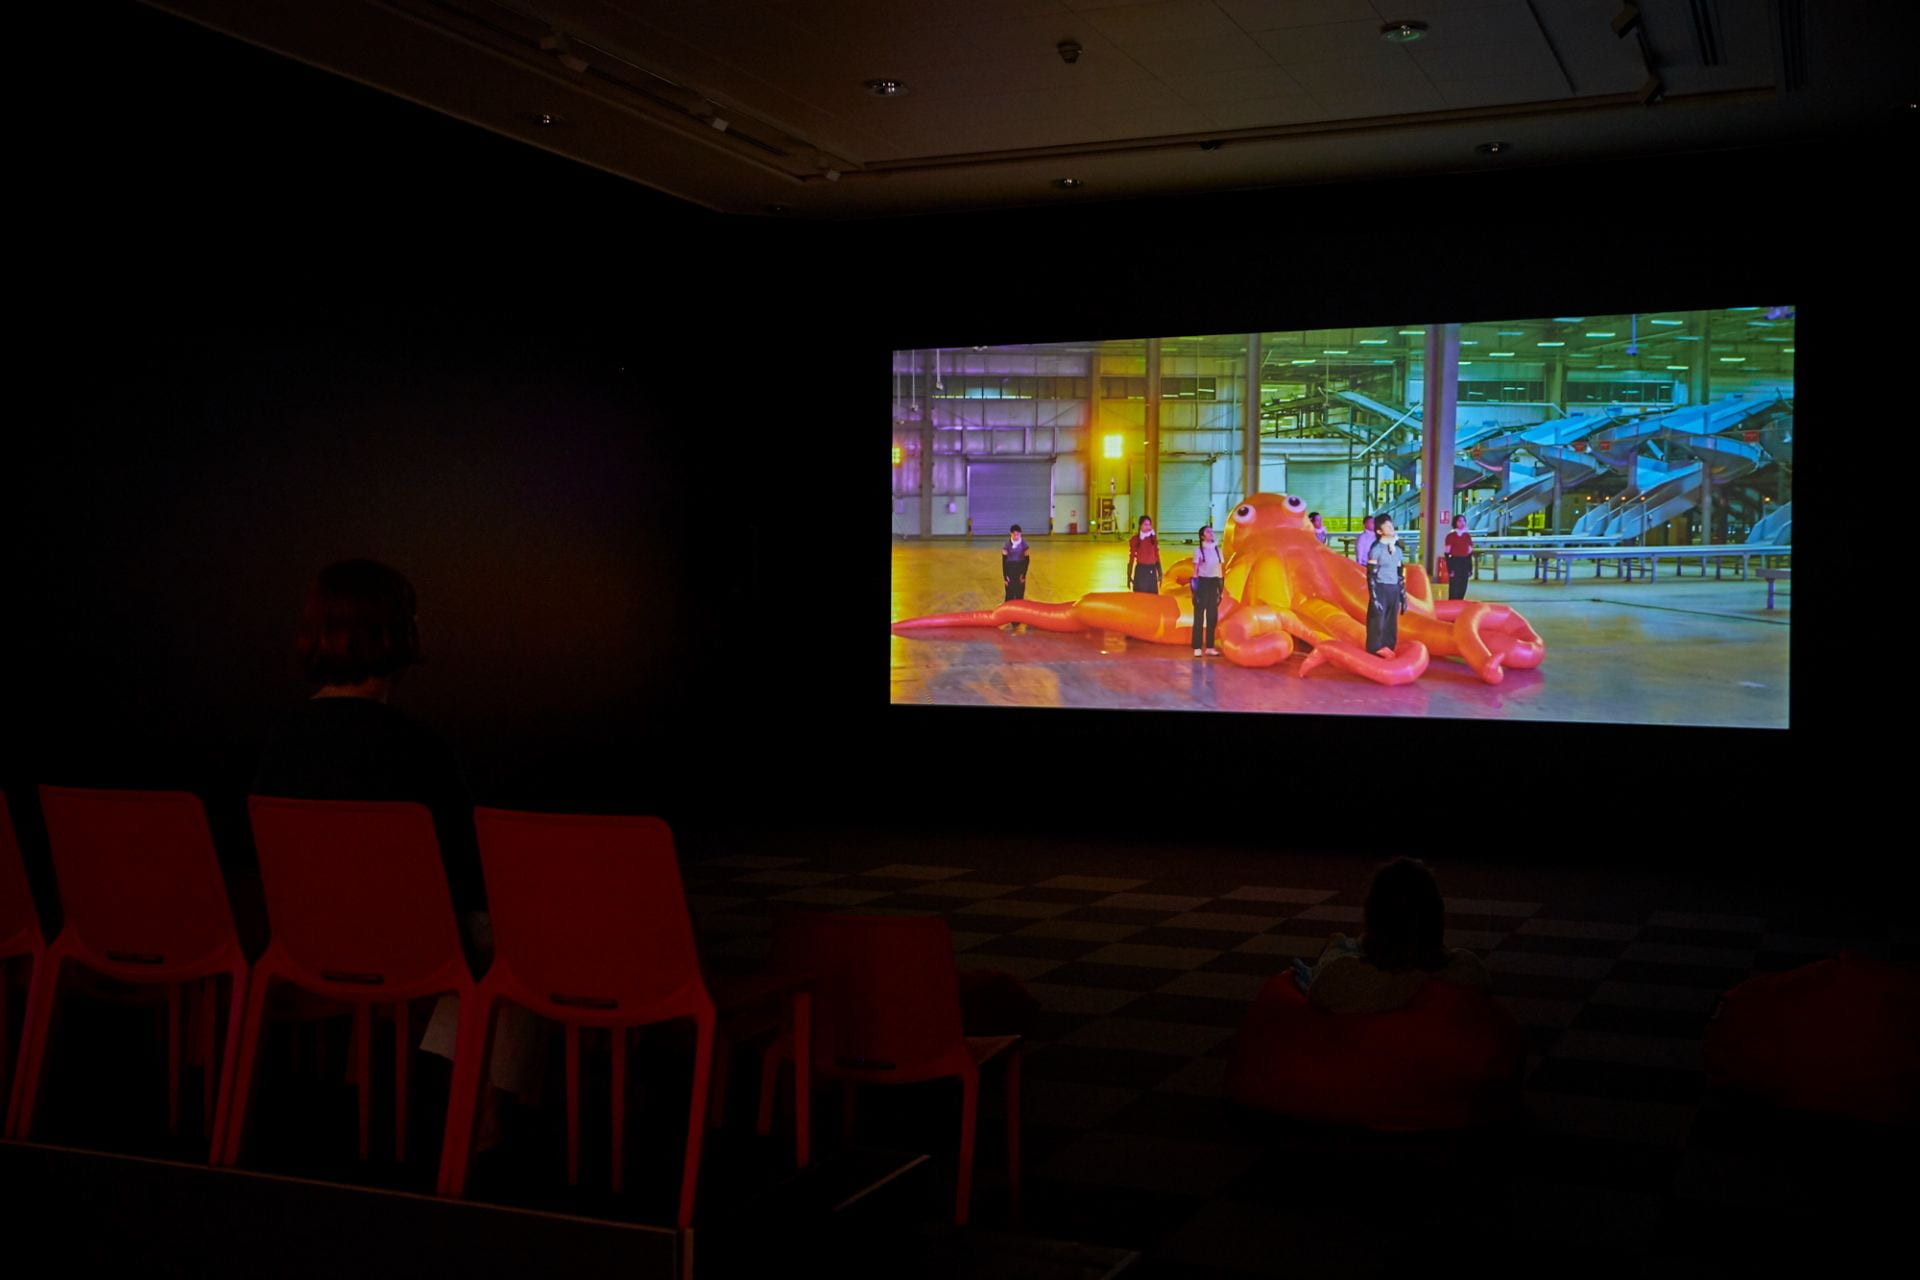 A film projected in a dark room. In the film, a huge inflated bright orange octopus is surrounded by dancers standing among its tentacles. The scene takes place in a dimly lit warehouse.